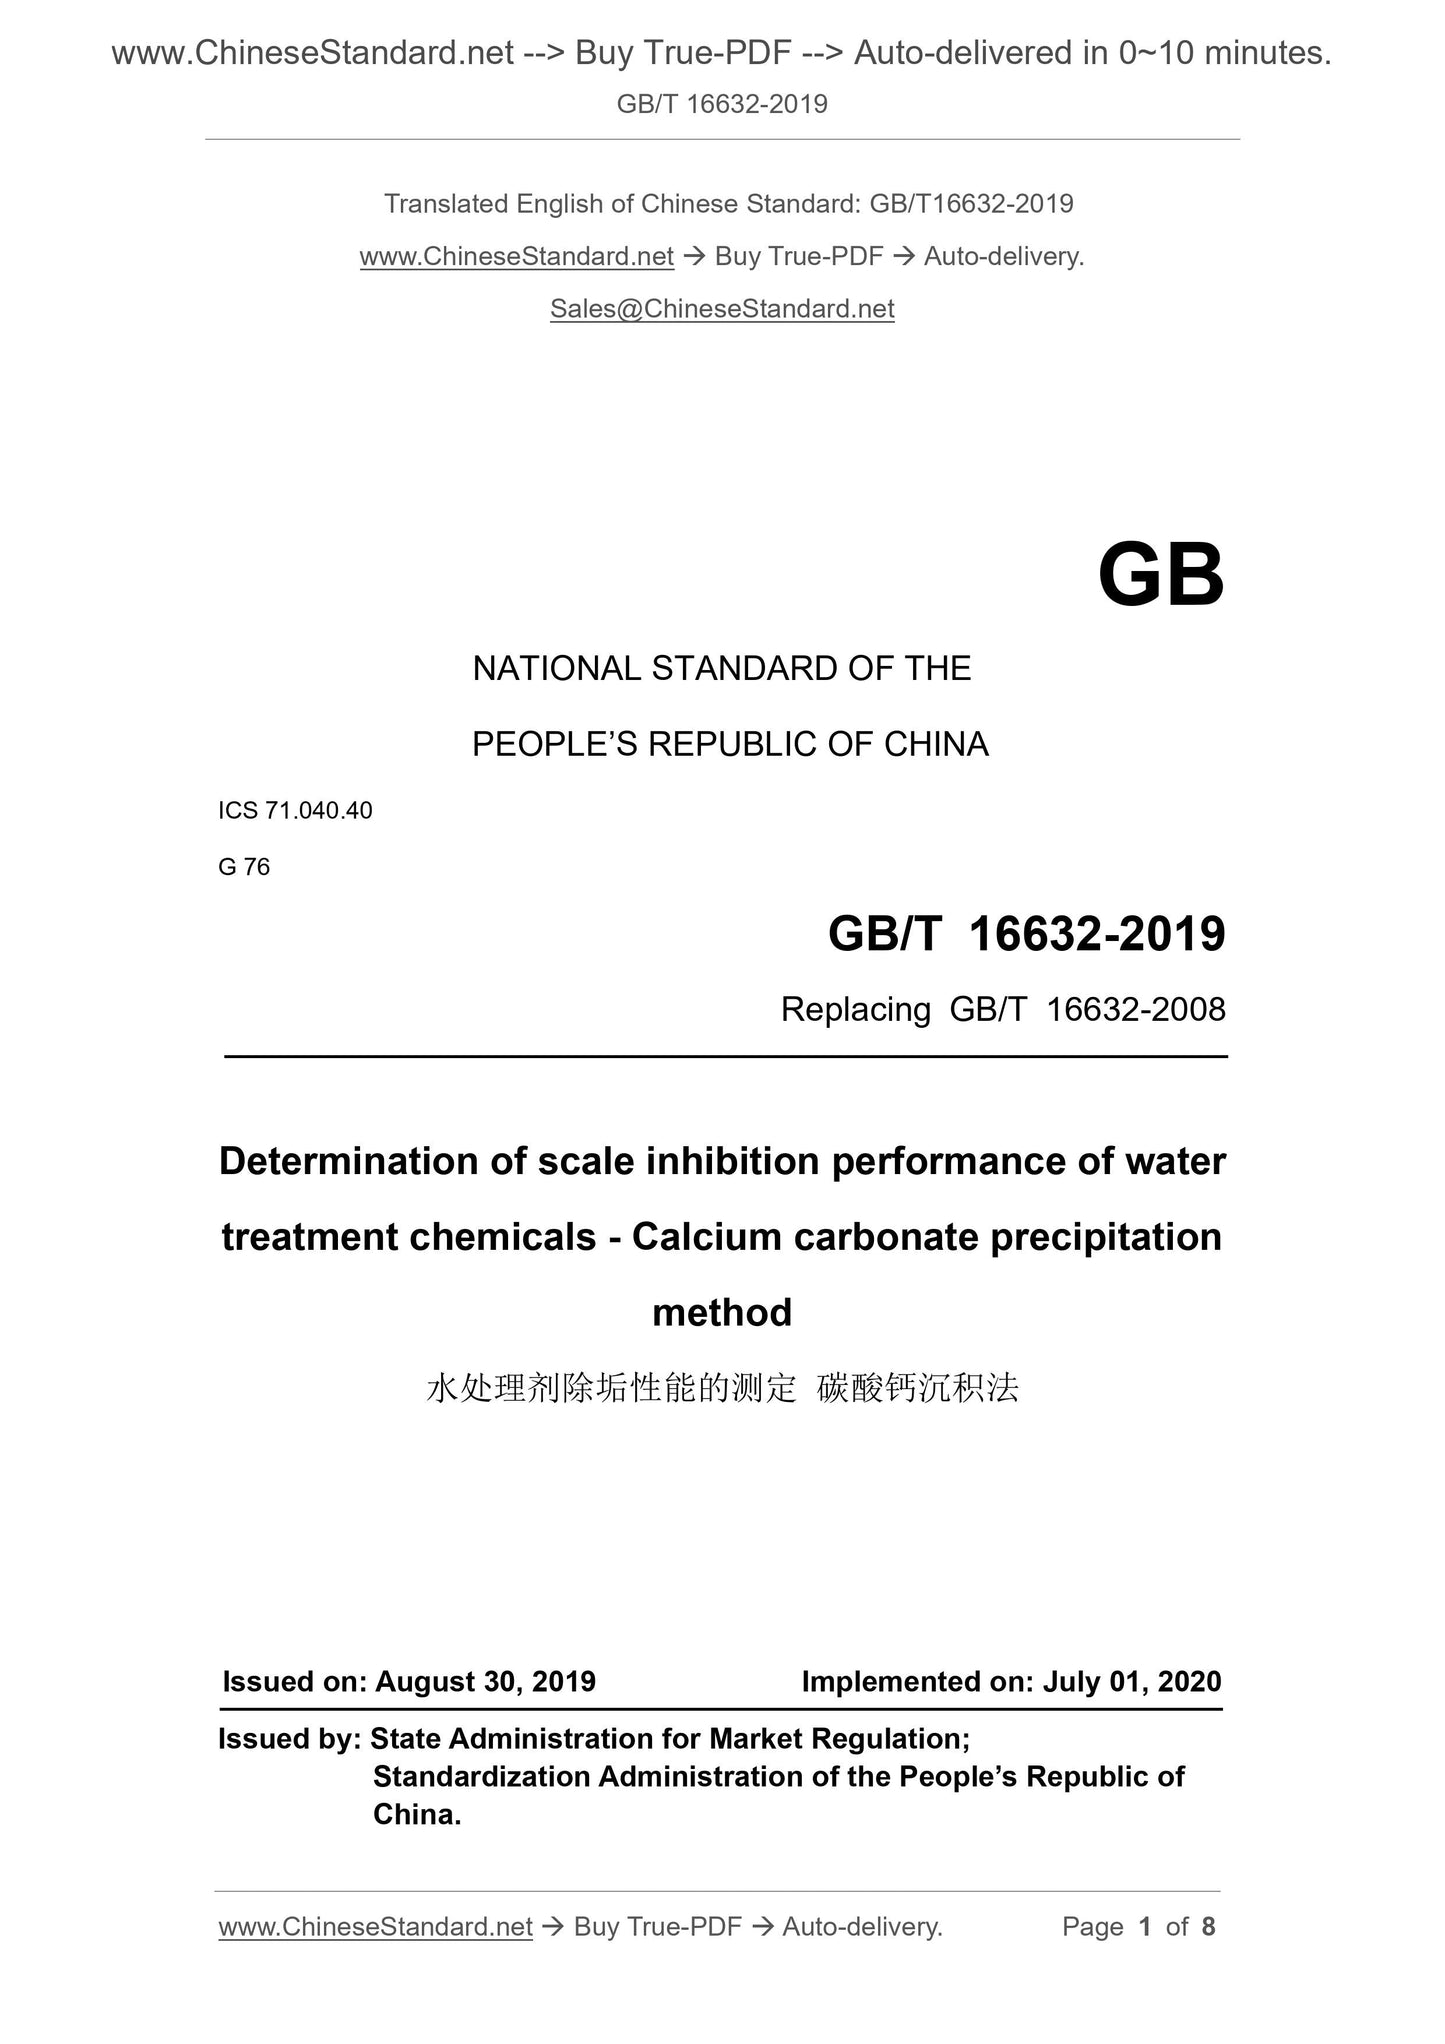 GB/T 16632-2019 Page 1